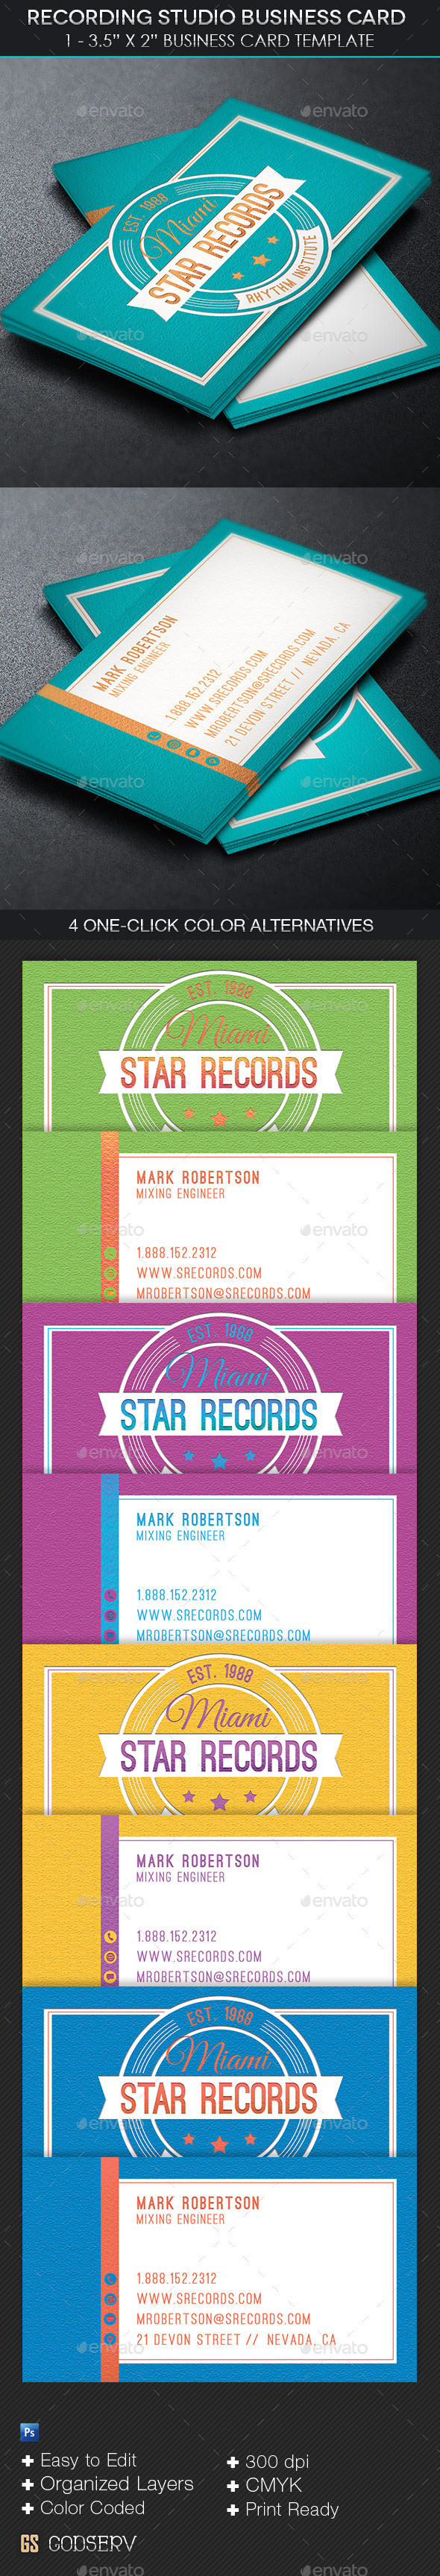 Recording studio business card template preview